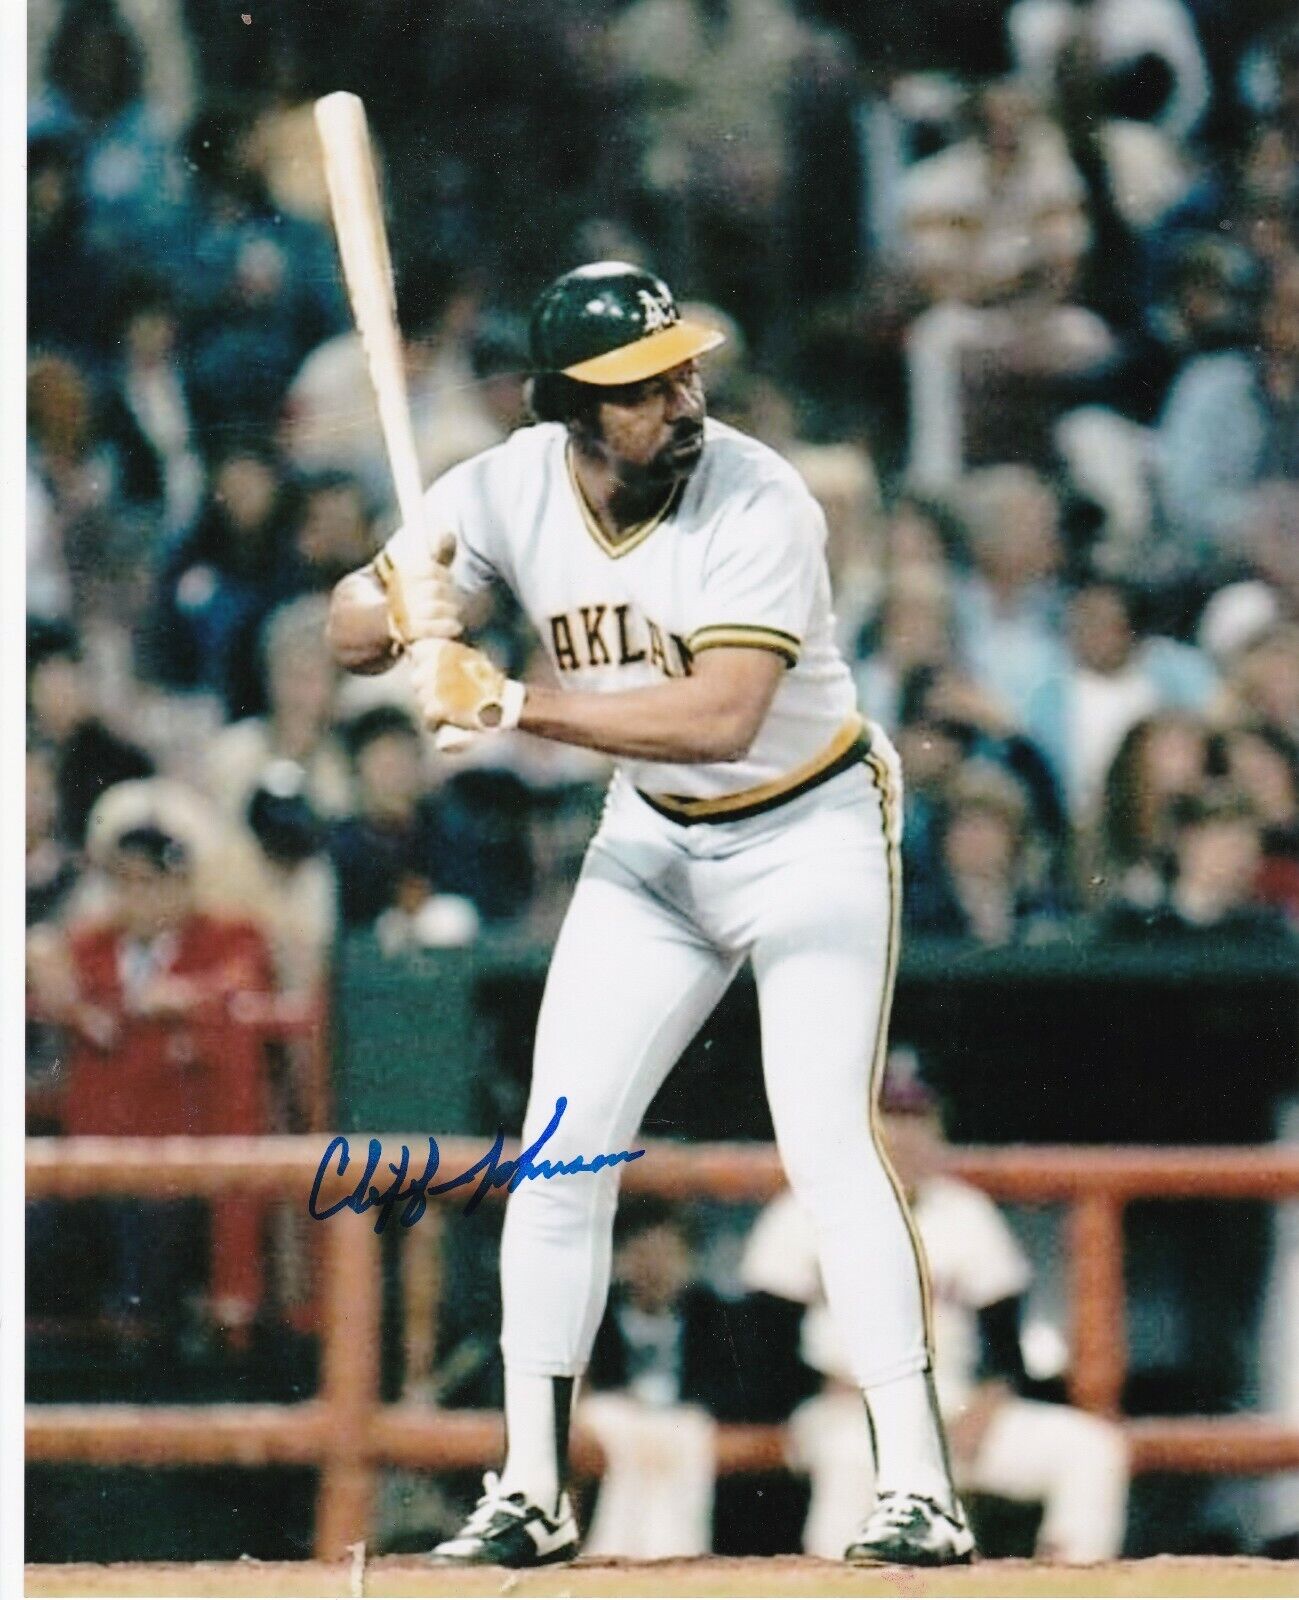 CLIFF JOHNSON OAKLAND A'S ACTION SIGNED 8x10